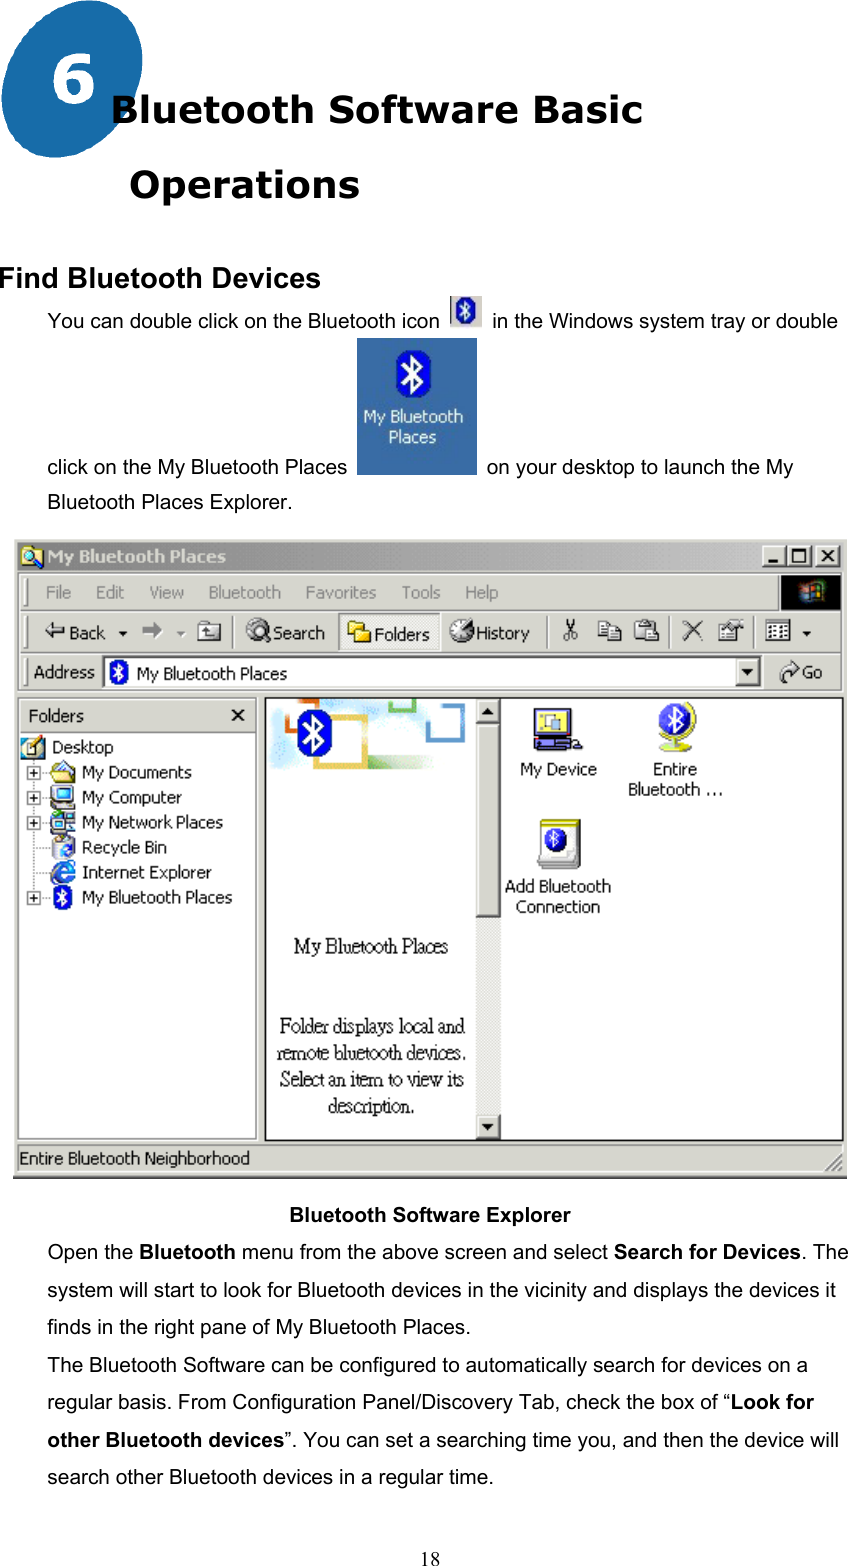  18 Bluetooth Software Basic Operations  Find Bluetooth Devices You can double click on the Bluetooth icon    in the Windows system tray or double click on the My Bluetooth Places    on your desktop to launch the My Bluetooth Places Explorer.  Bluetooth Software Explorer Open the Bluetooth menu from the above screen and select Search for Devices. The system will start to look for Bluetooth devices in the vicinity and displays the devices it finds in the right pane of My Bluetooth Places.   The Bluetooth Software can be configured to automatically search for devices on a regular basis. From Configuration Panel/Discovery Tab, check the box of “Look for other Bluetooth devices”. You can set a searching time you, and then the device will search other Bluetooth devices in a regular time. 